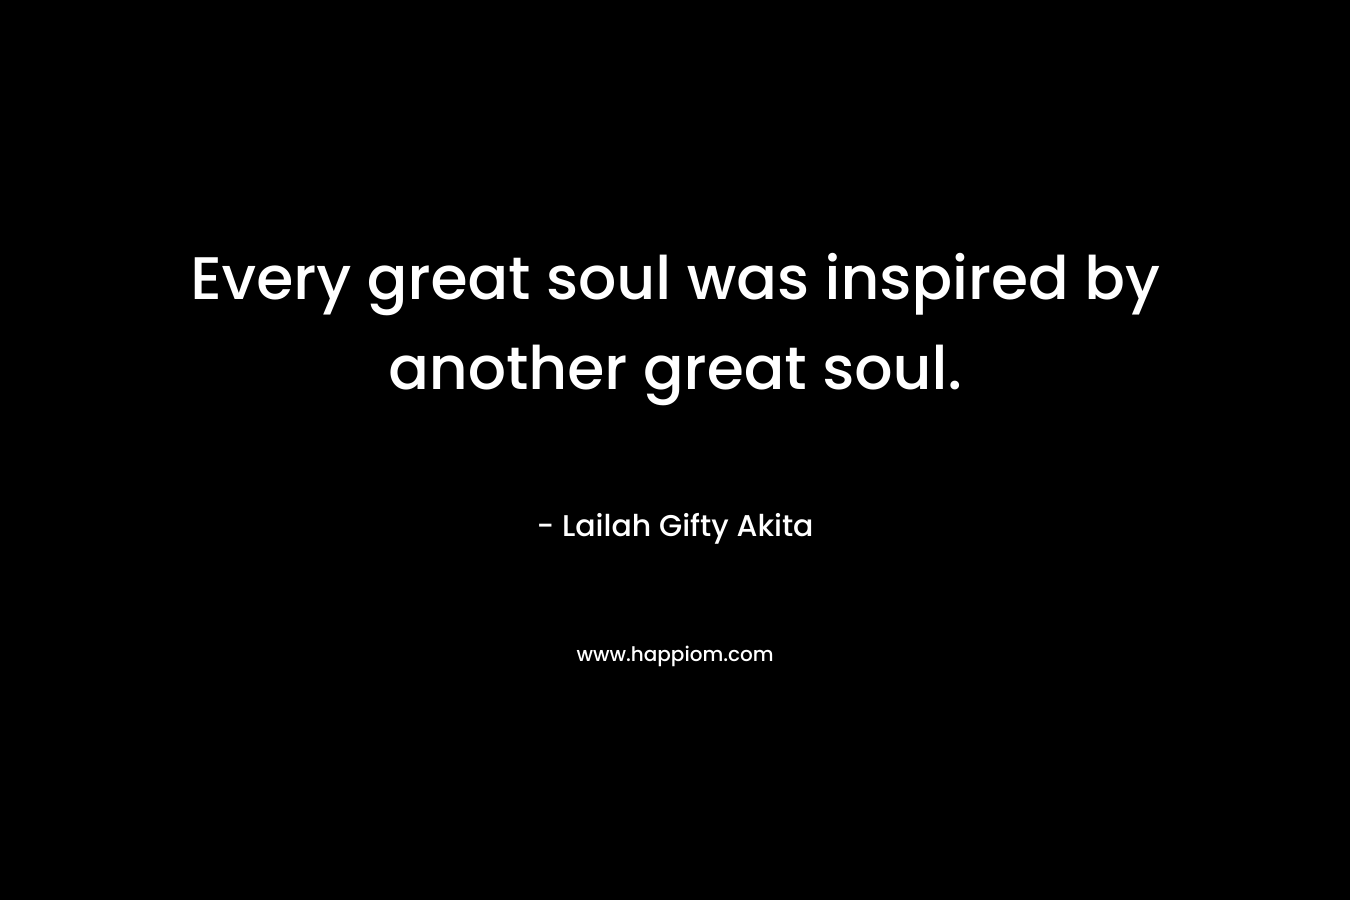 Every great soul was inspired by another great soul.